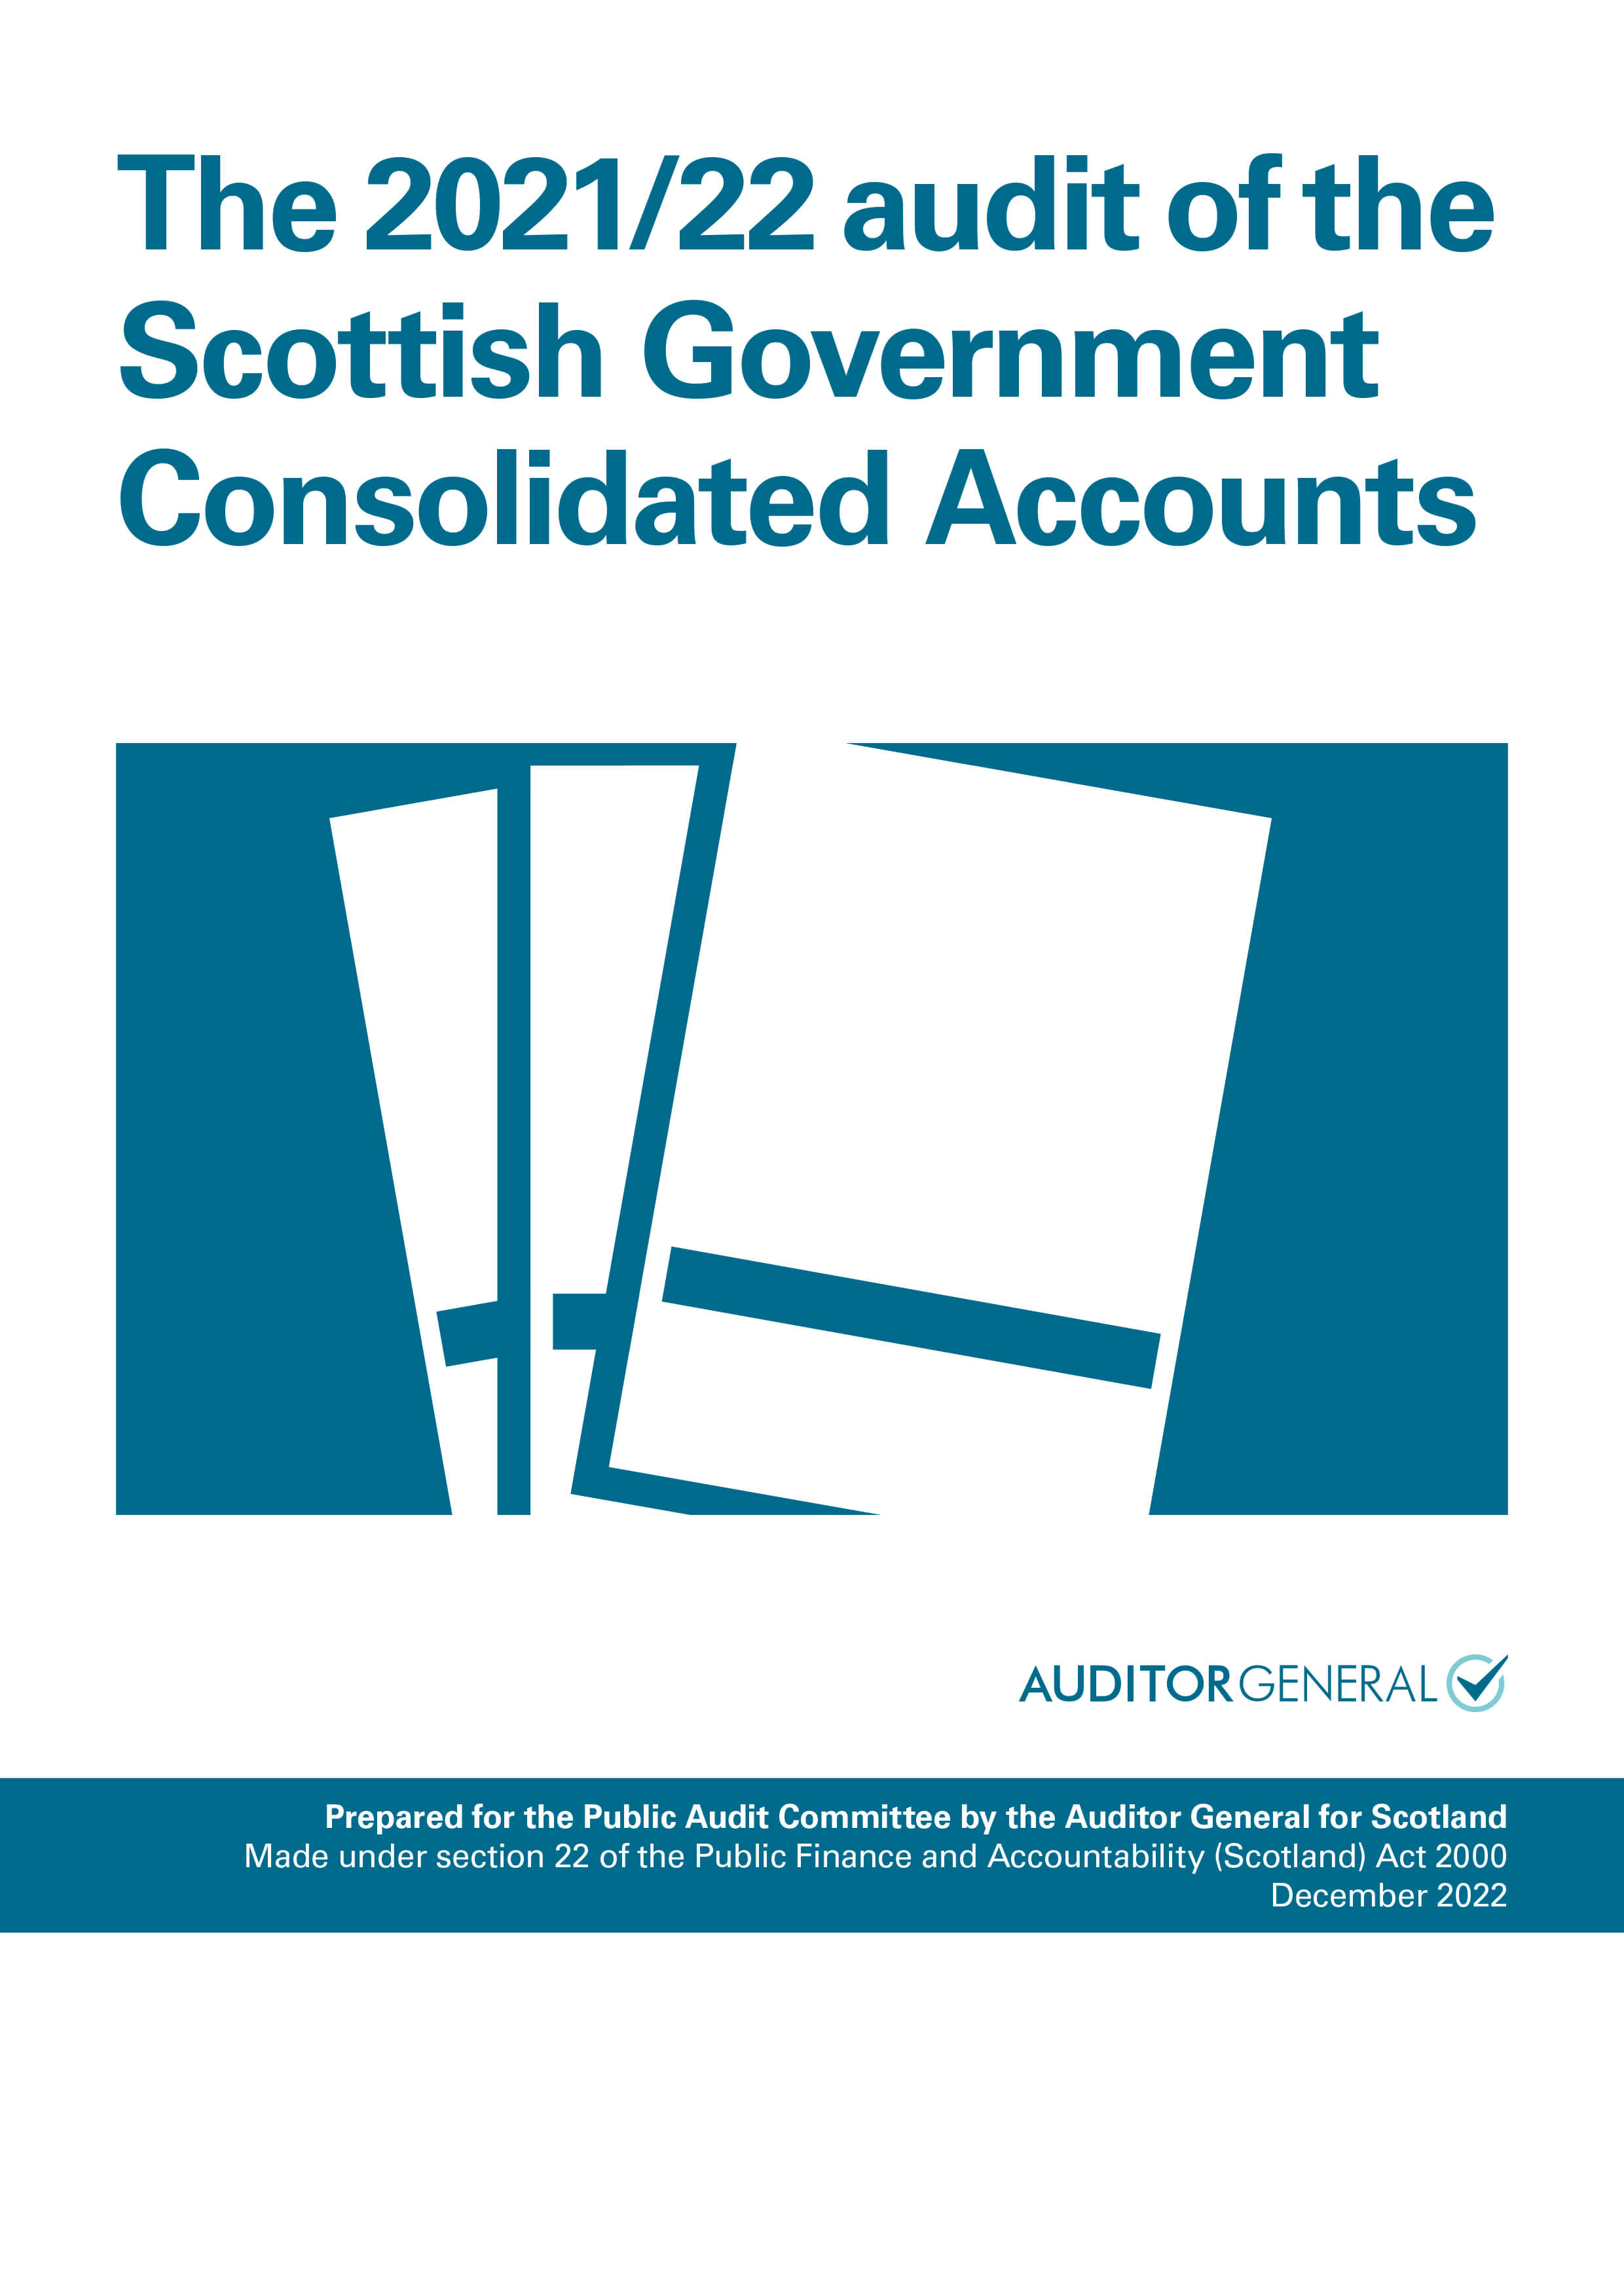 View The 2021/22 audit of the Scottish Government Consolidated Accounts